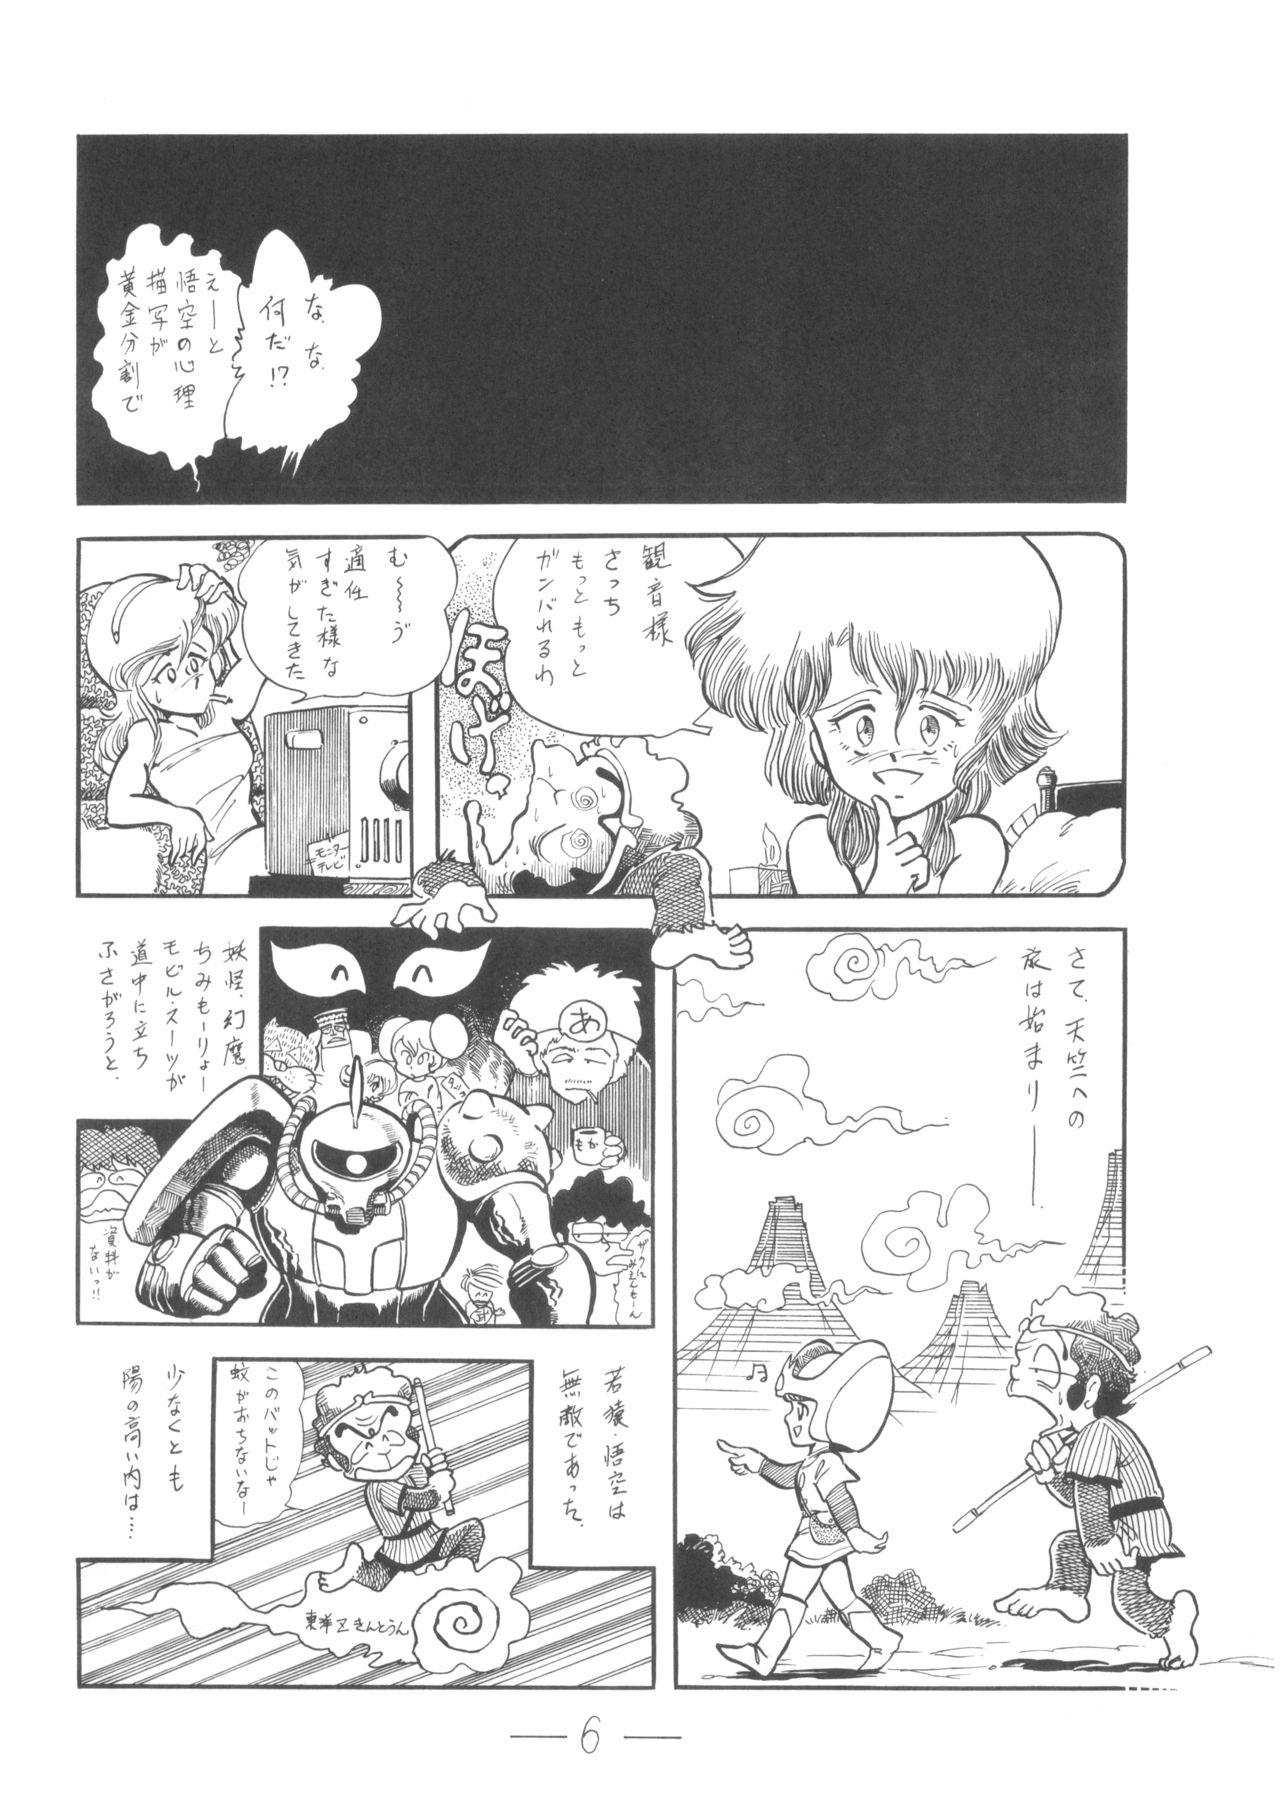 Public Cybele Vol.6 - Dirty pair Journey to the west Gaping - Page 7